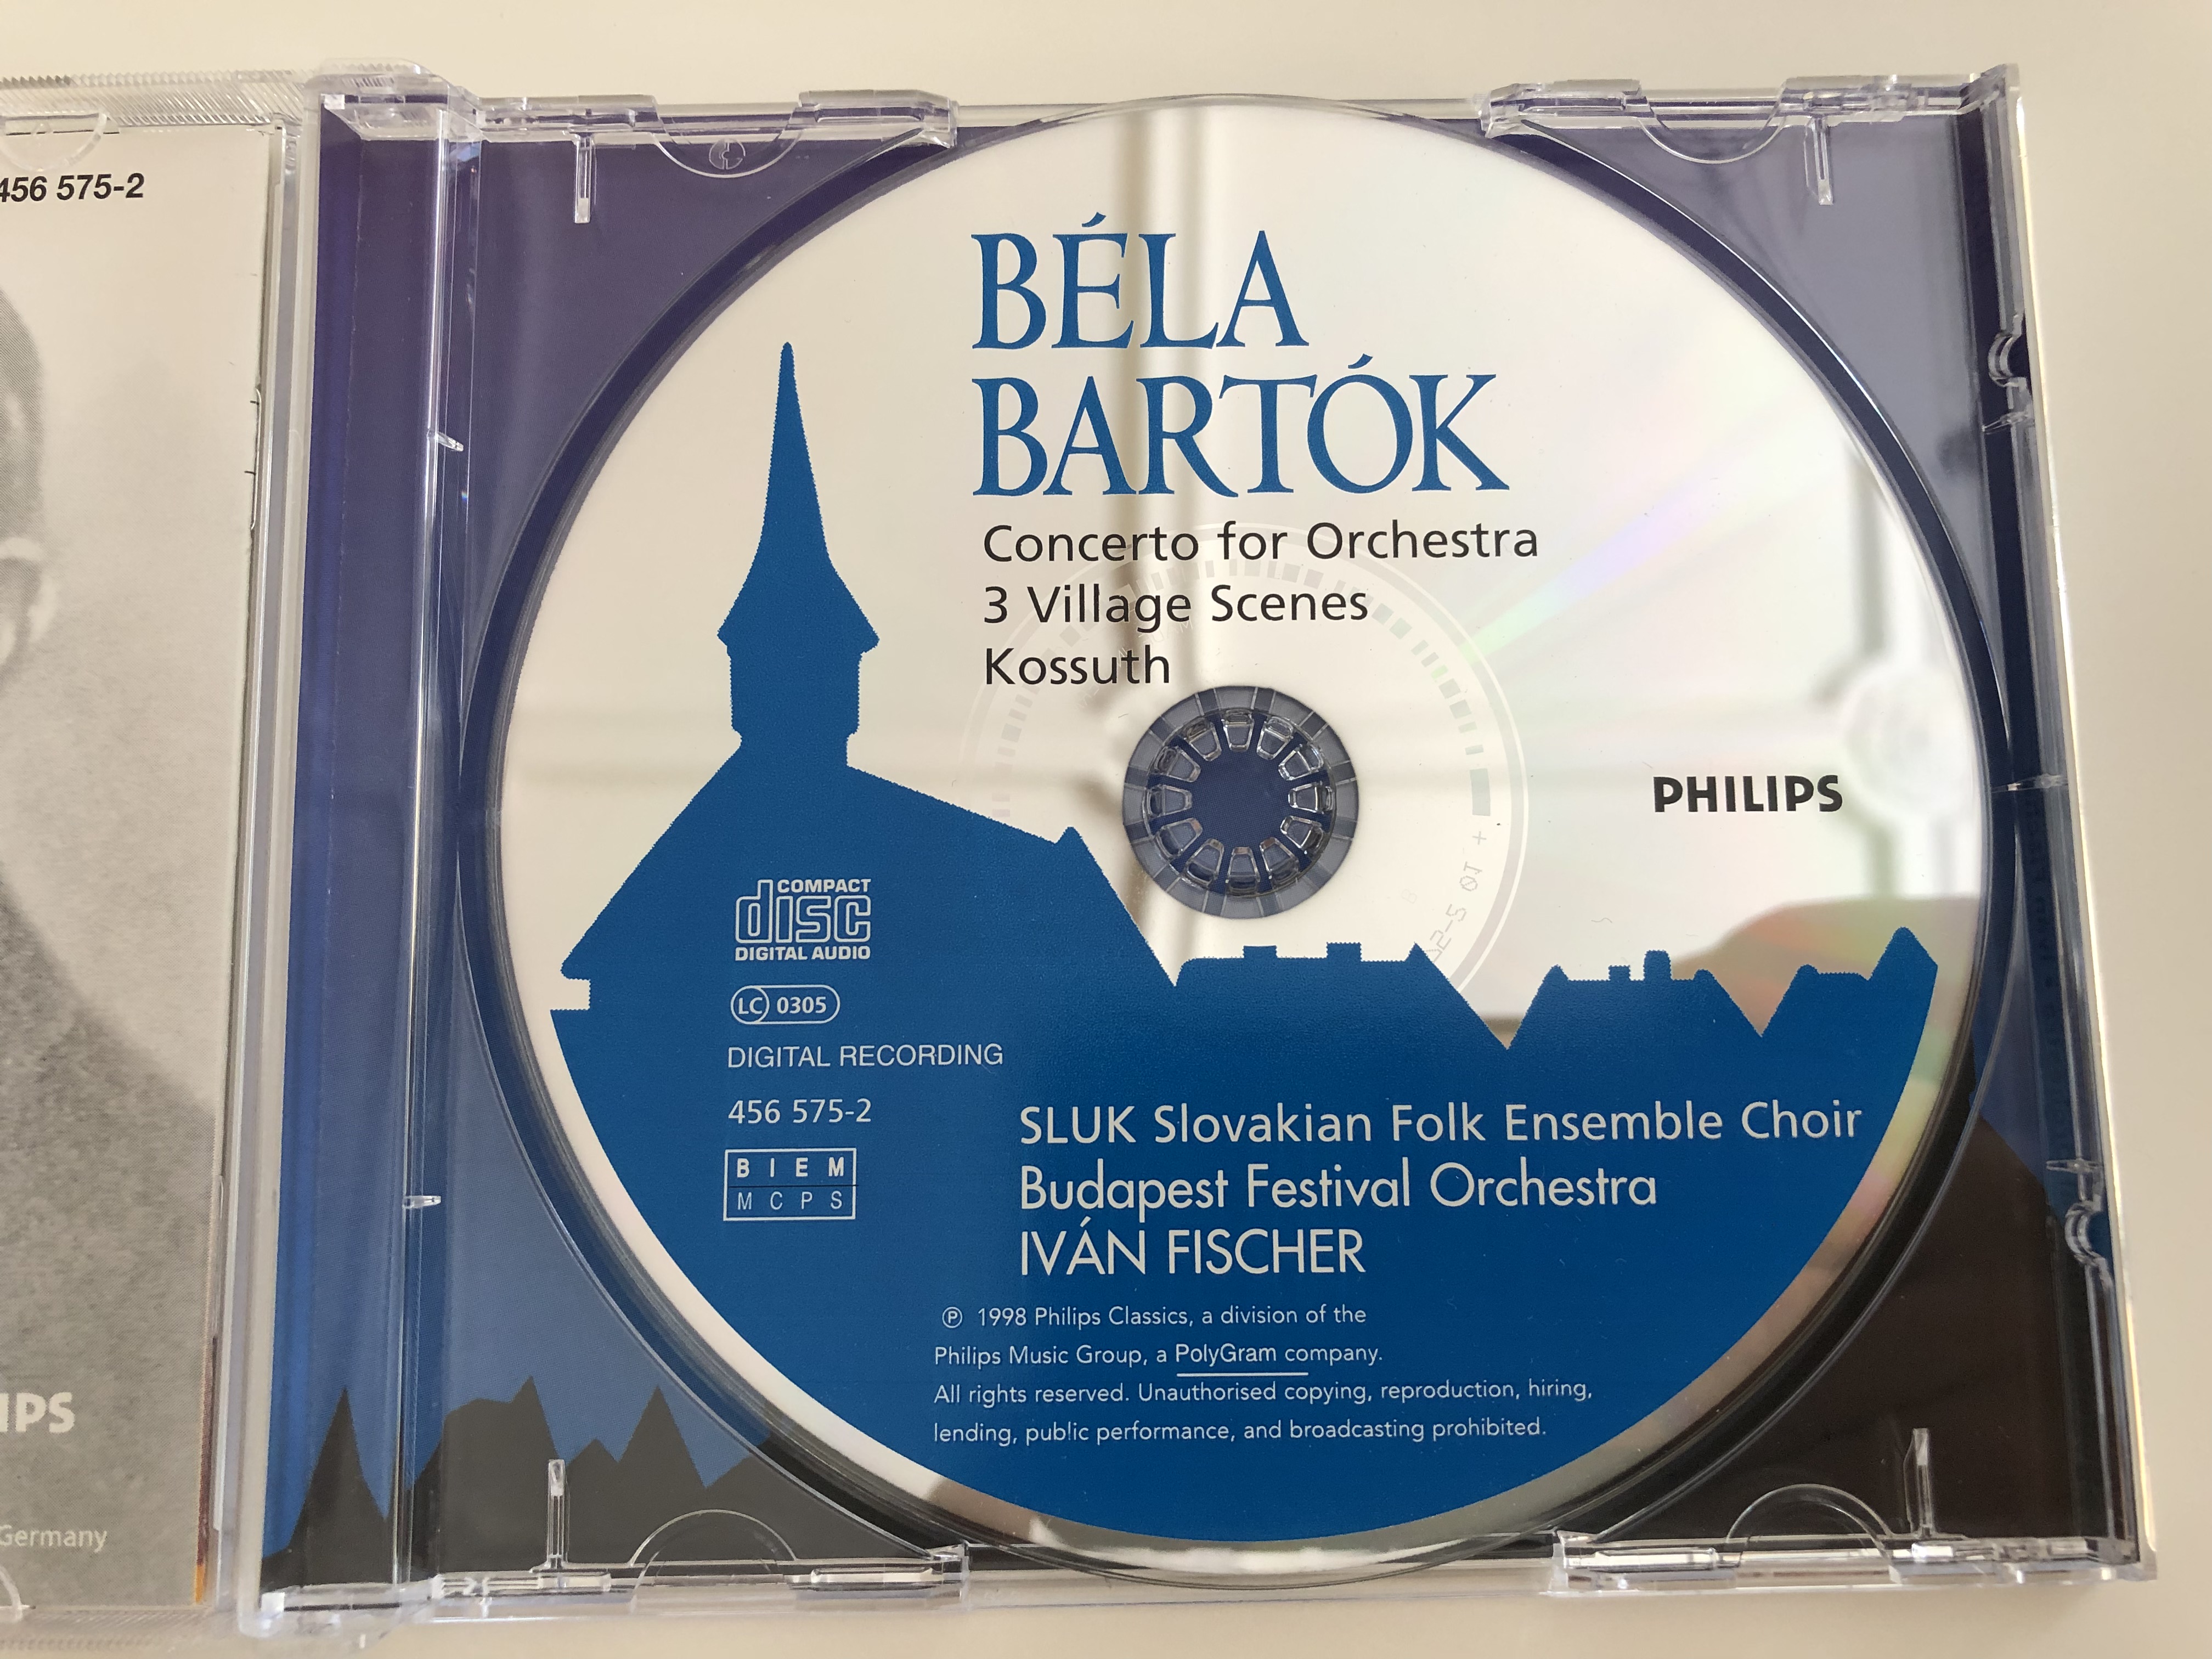 b-la-bart-k-concerto-for-orchestra-3-village-scenes-kossuth-budapest-festival-orchestra-conducted-by-ivan-fischer-philips-classics-audio-cd-1998-456-575-2-6-.jpg